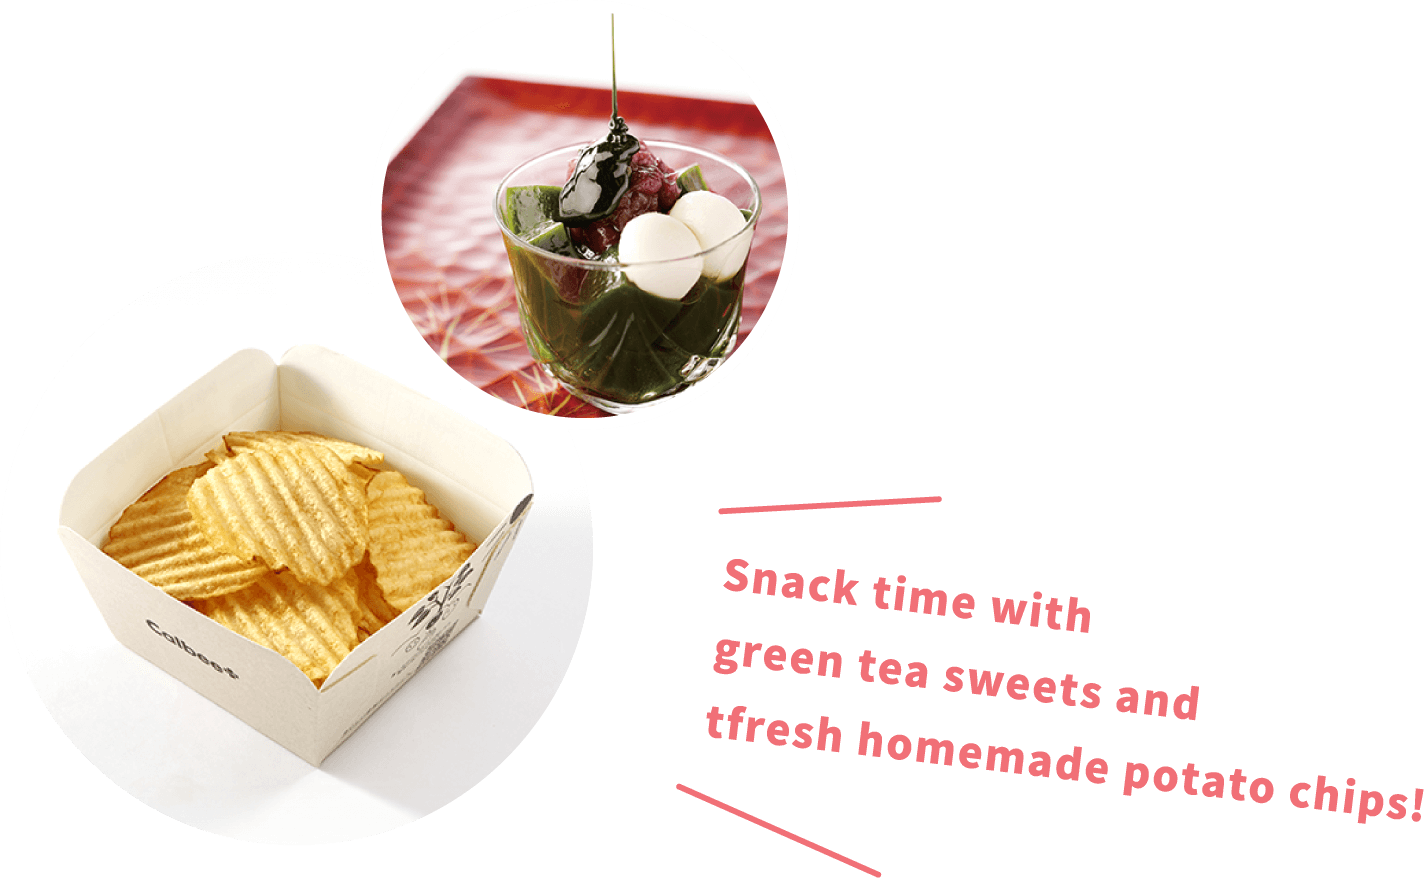 Snack time with green tea sweets and fresh homemade potato chips!